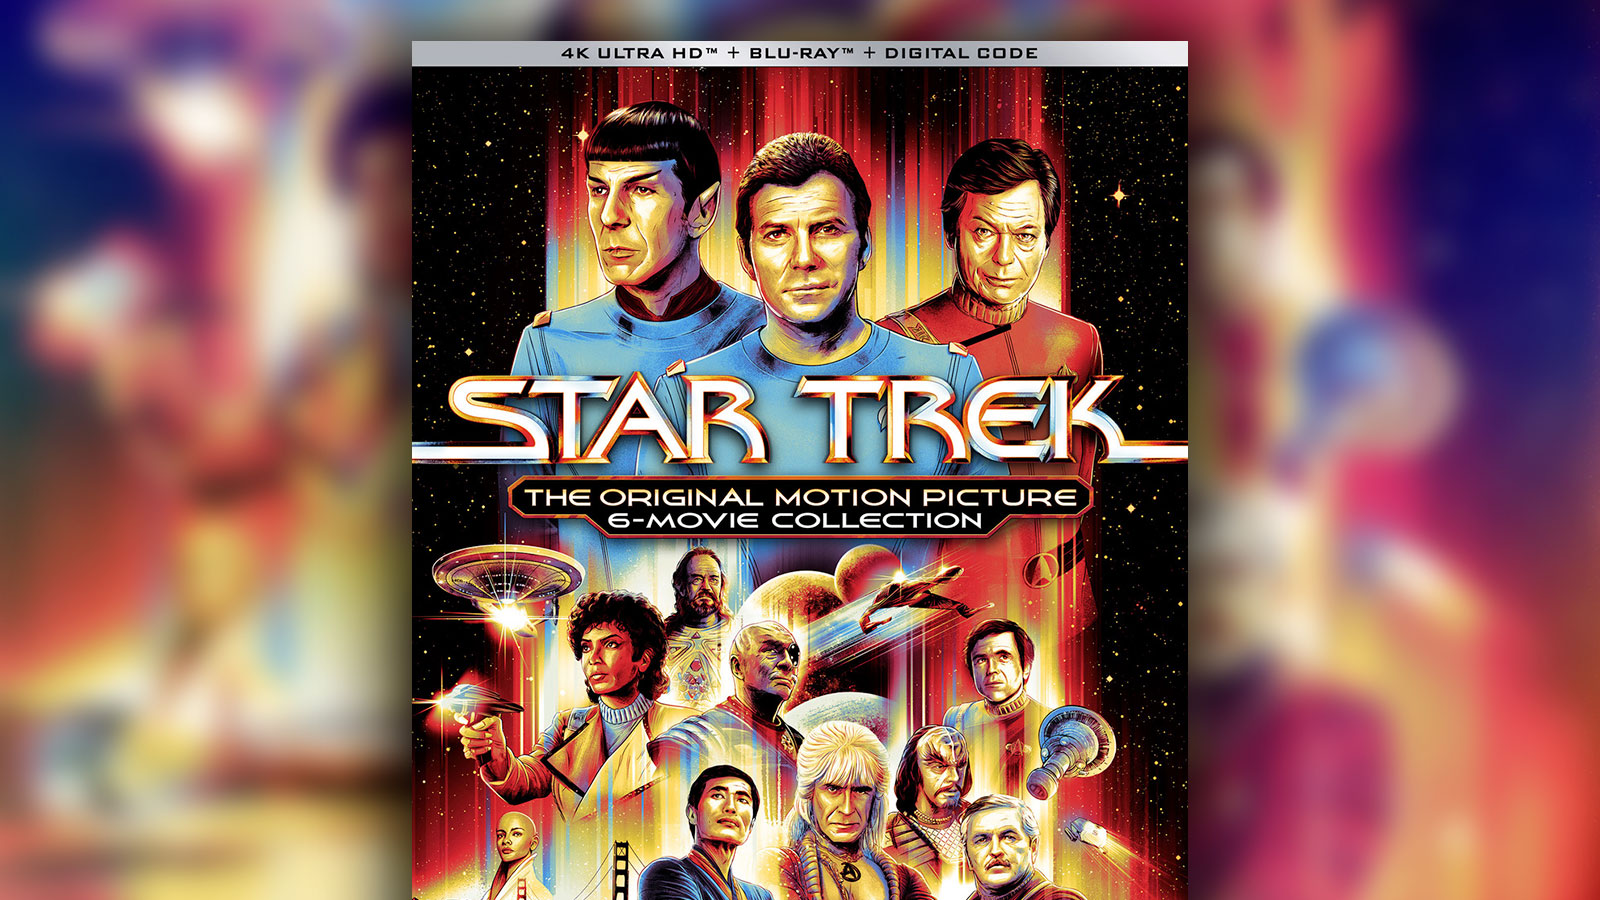 Star Trek: The Original Motion Picture 6-Movie Collection Review